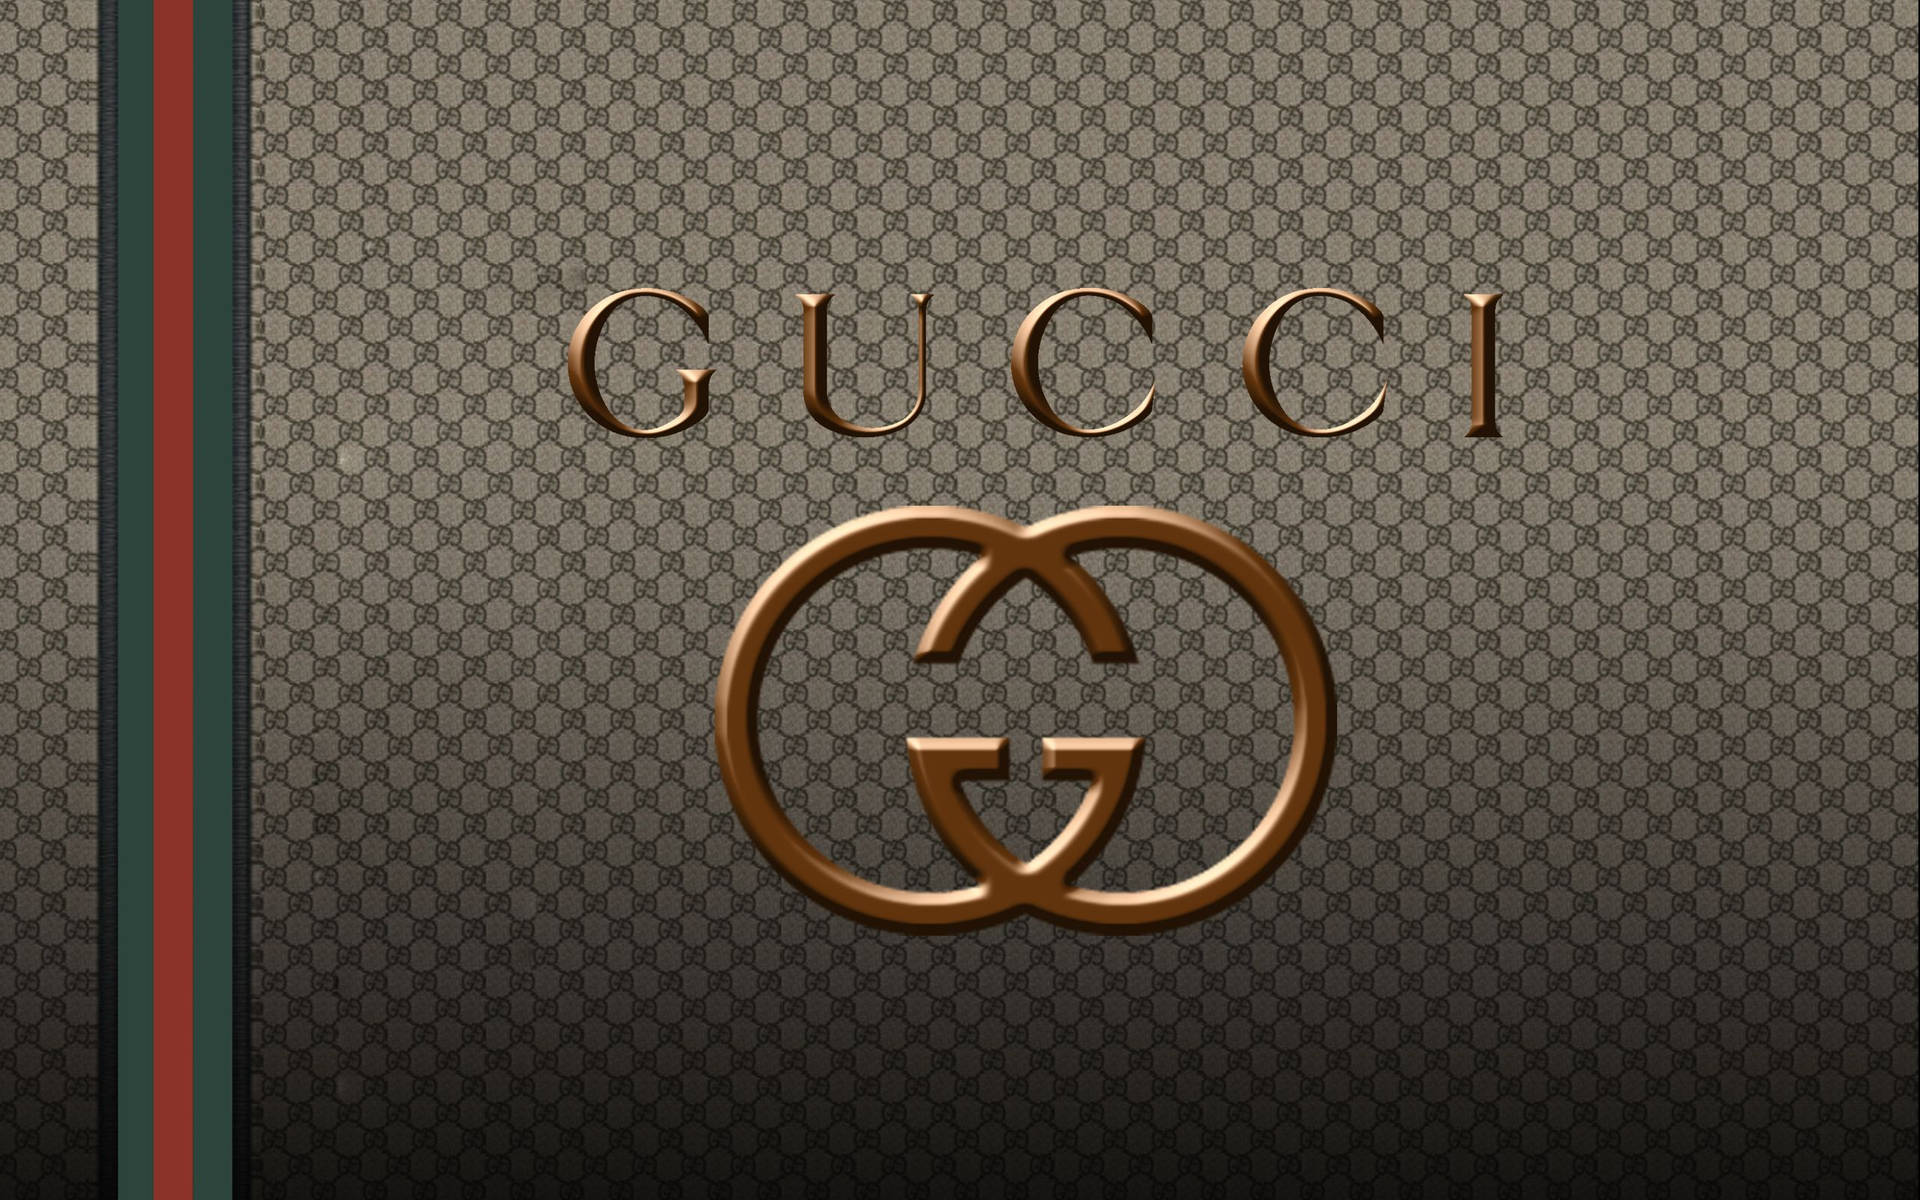 Join the Gucci Nation // Description: Luxurious and iconic, Gucci stands for sophistication and style. Reimagine your look with updates from the Italian fashion house. // Related Keywords: Gucci, Italian Fashion, Leather Goods, Men's Apparel, Women's Apparel, Luxury, Sophistication. Wallpaper